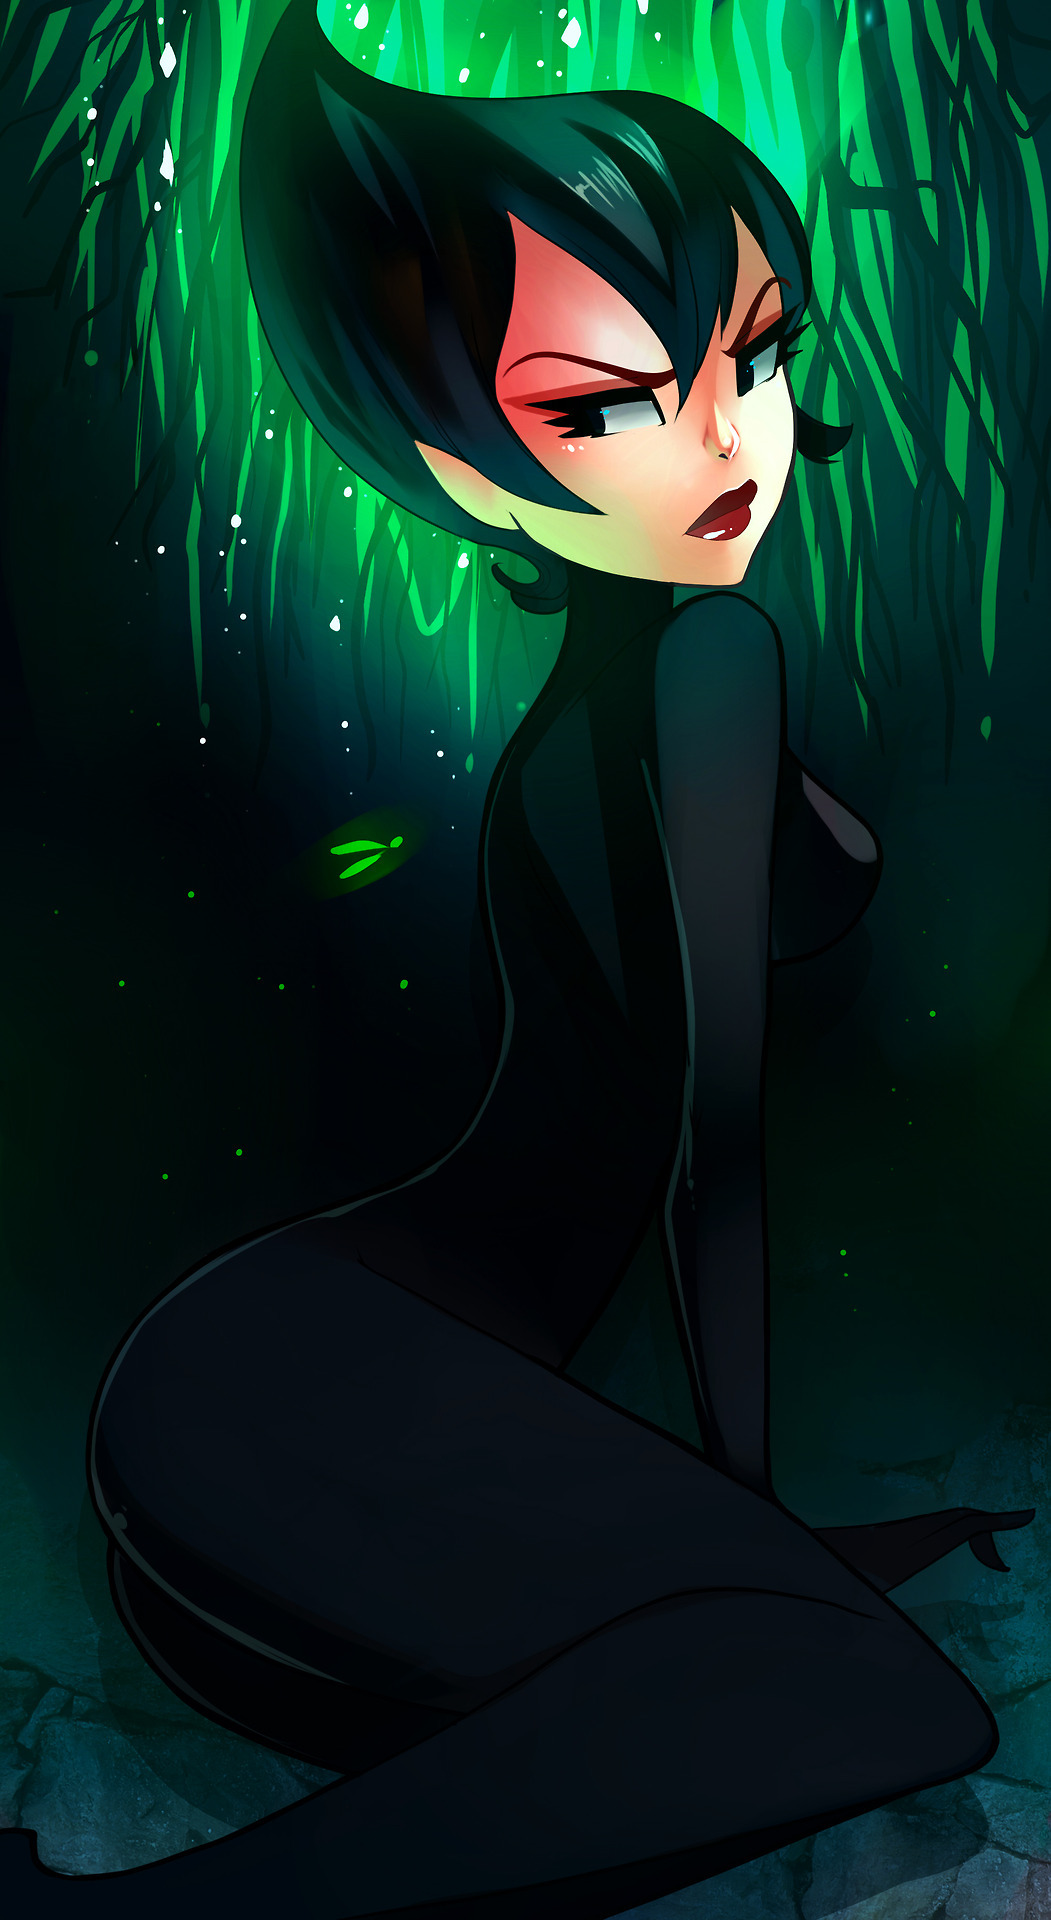 rotodisk: Quick Ashi doodle done while listening to some chillout drone ambient stuffs